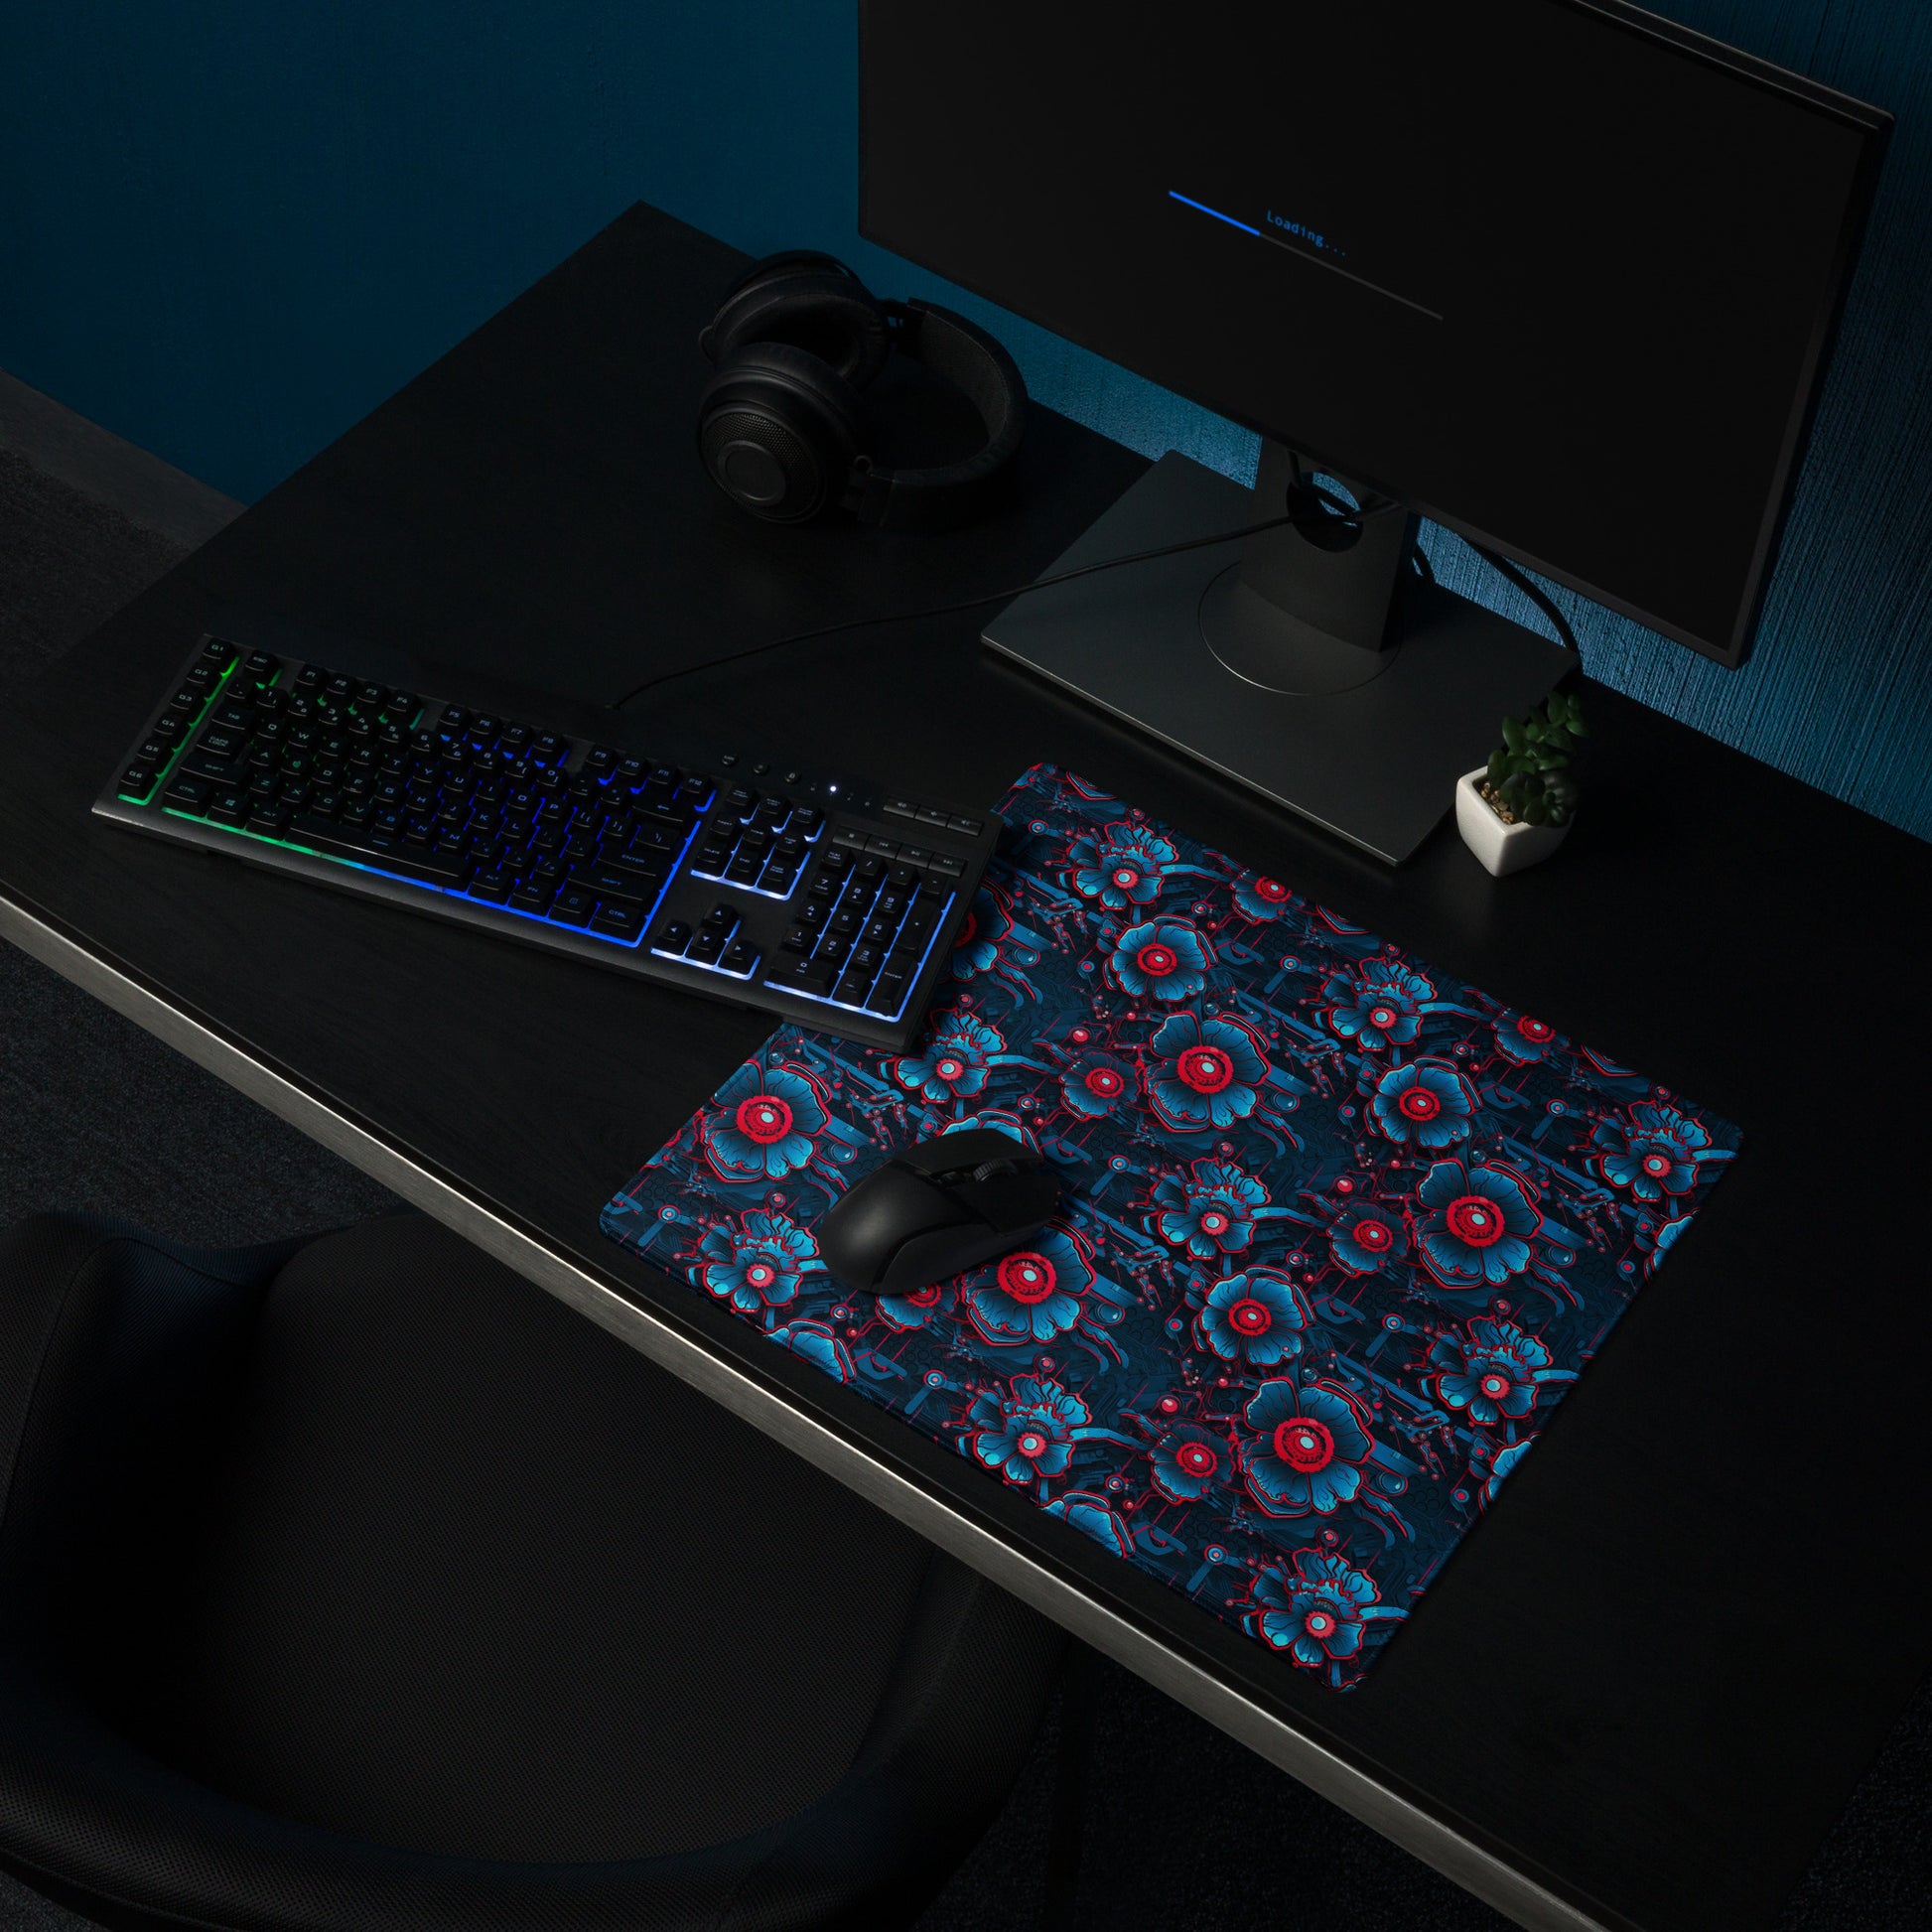 A 18" x 16" desk pad with a blue and red robotic floral pattern sitting on a desk.